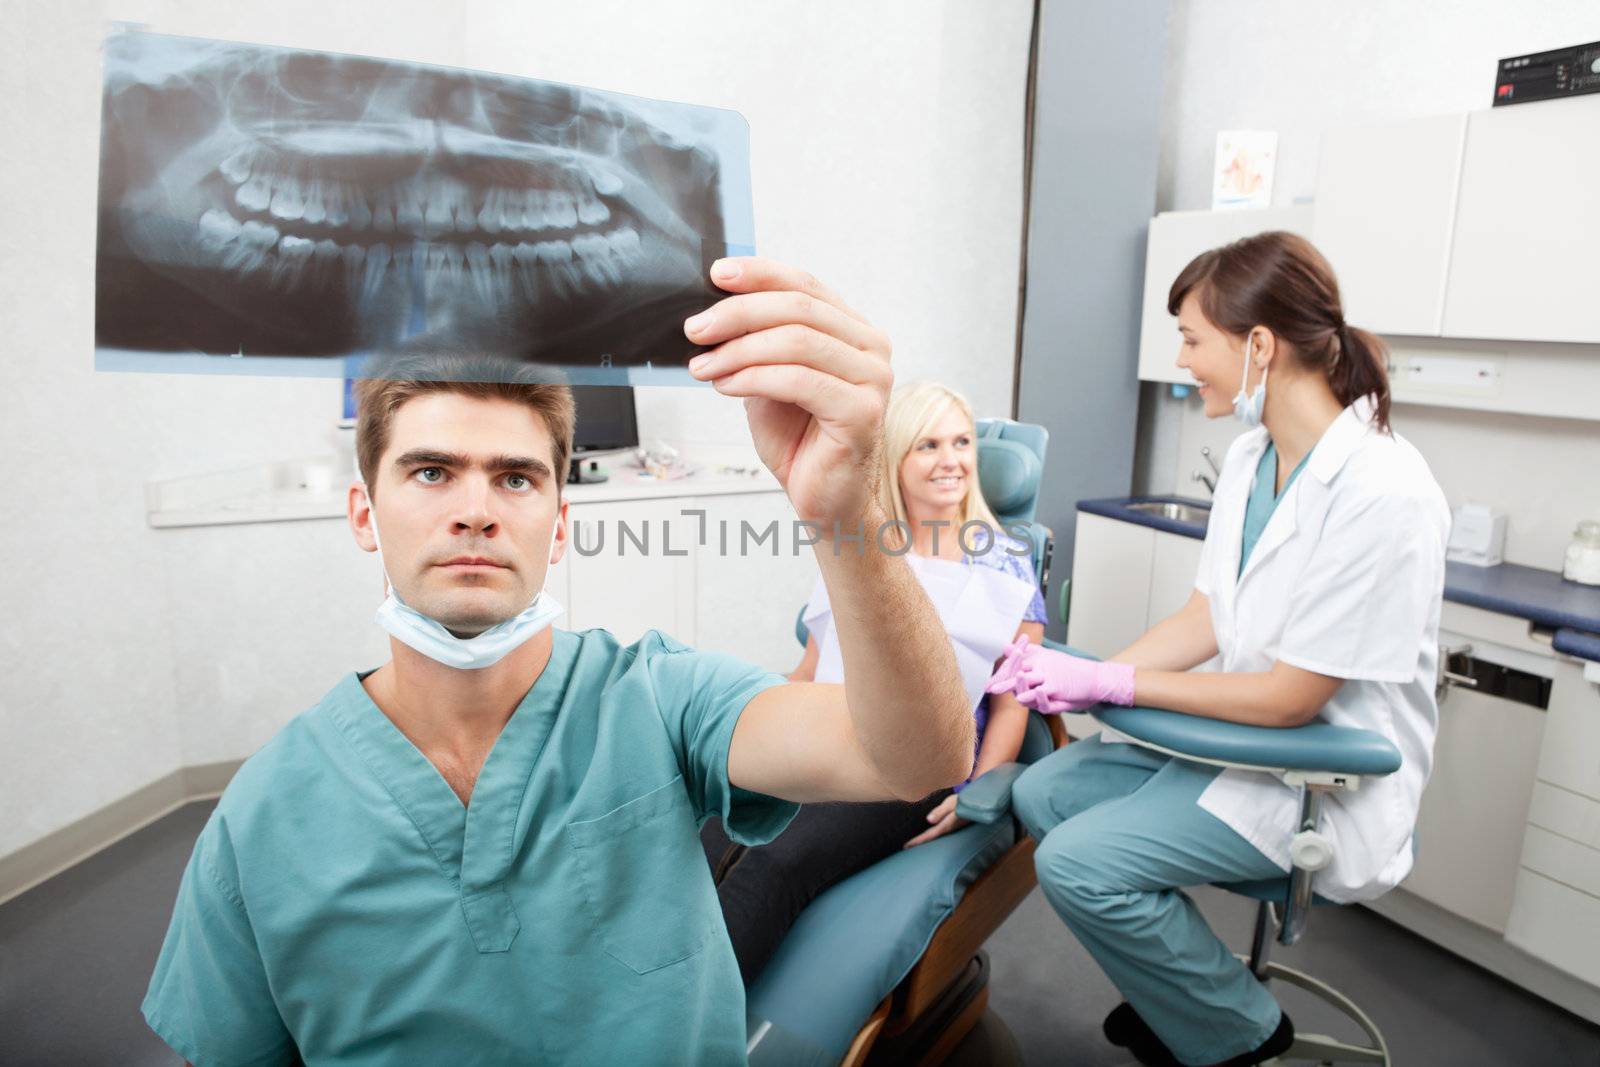 Radiodentist checking x-ray with assistant and patient having conversation in the background